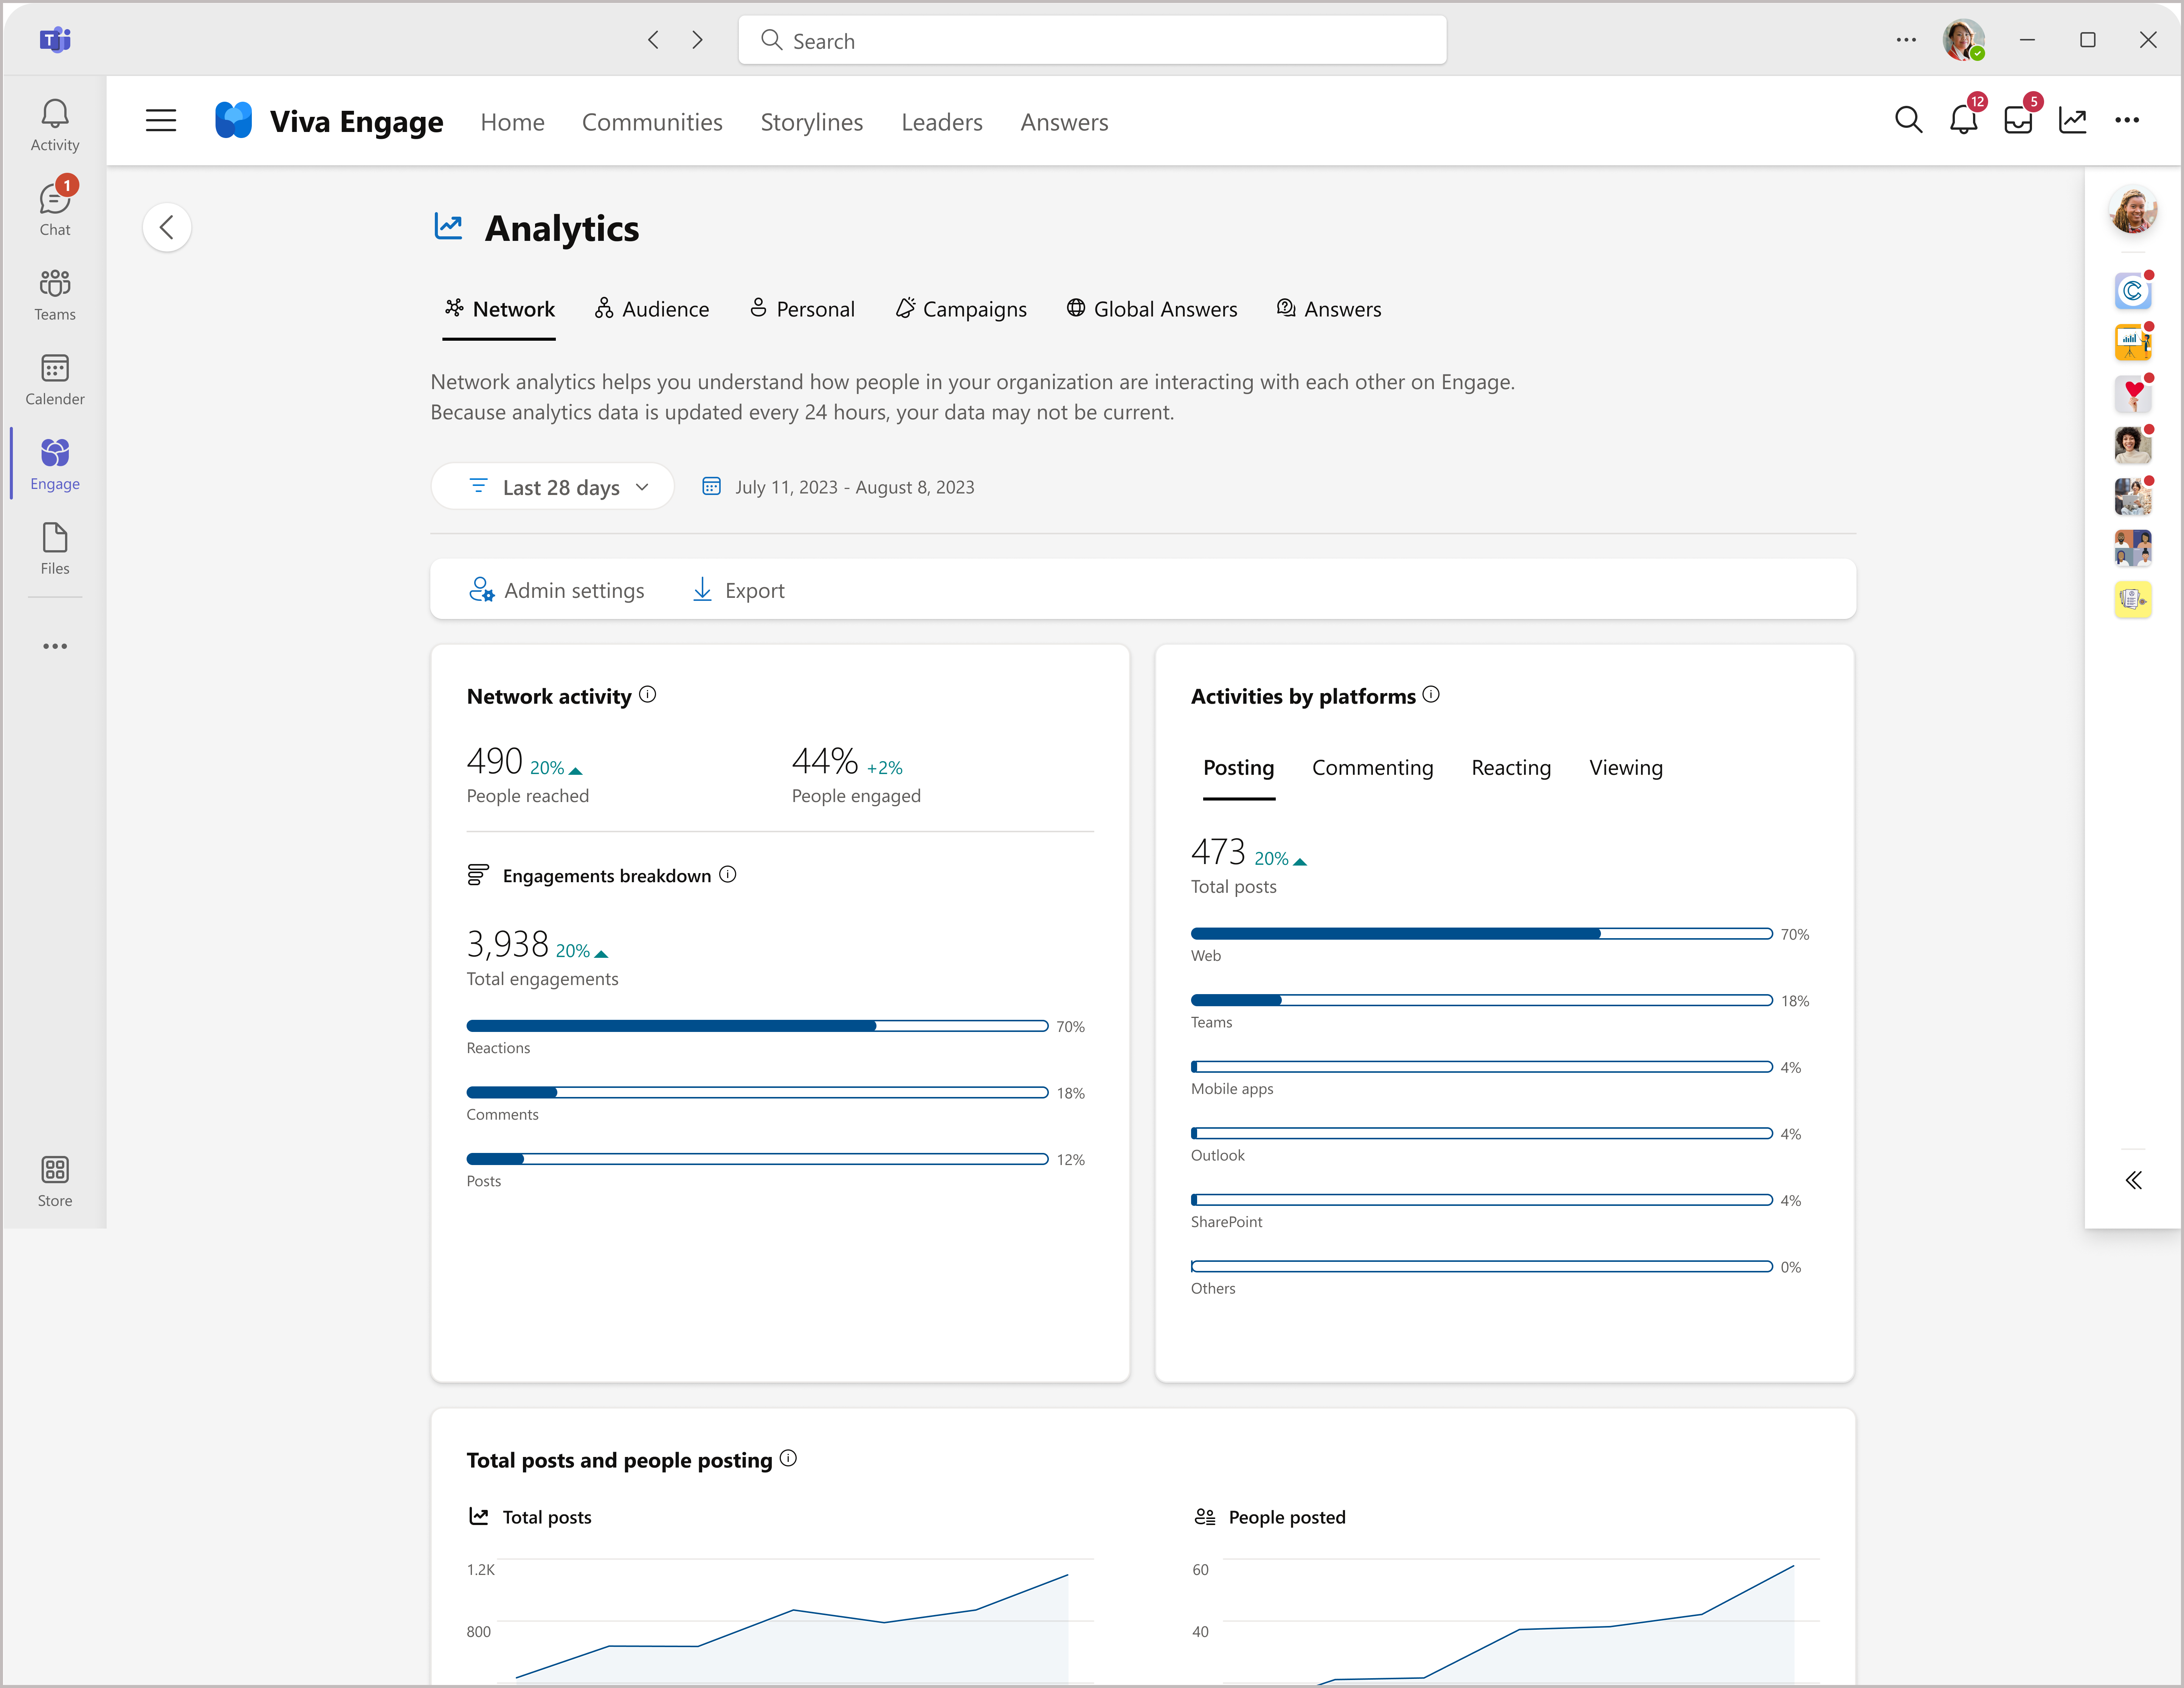 Screenshot of the Viva Engage admin center for viewing and managing Network analytics.